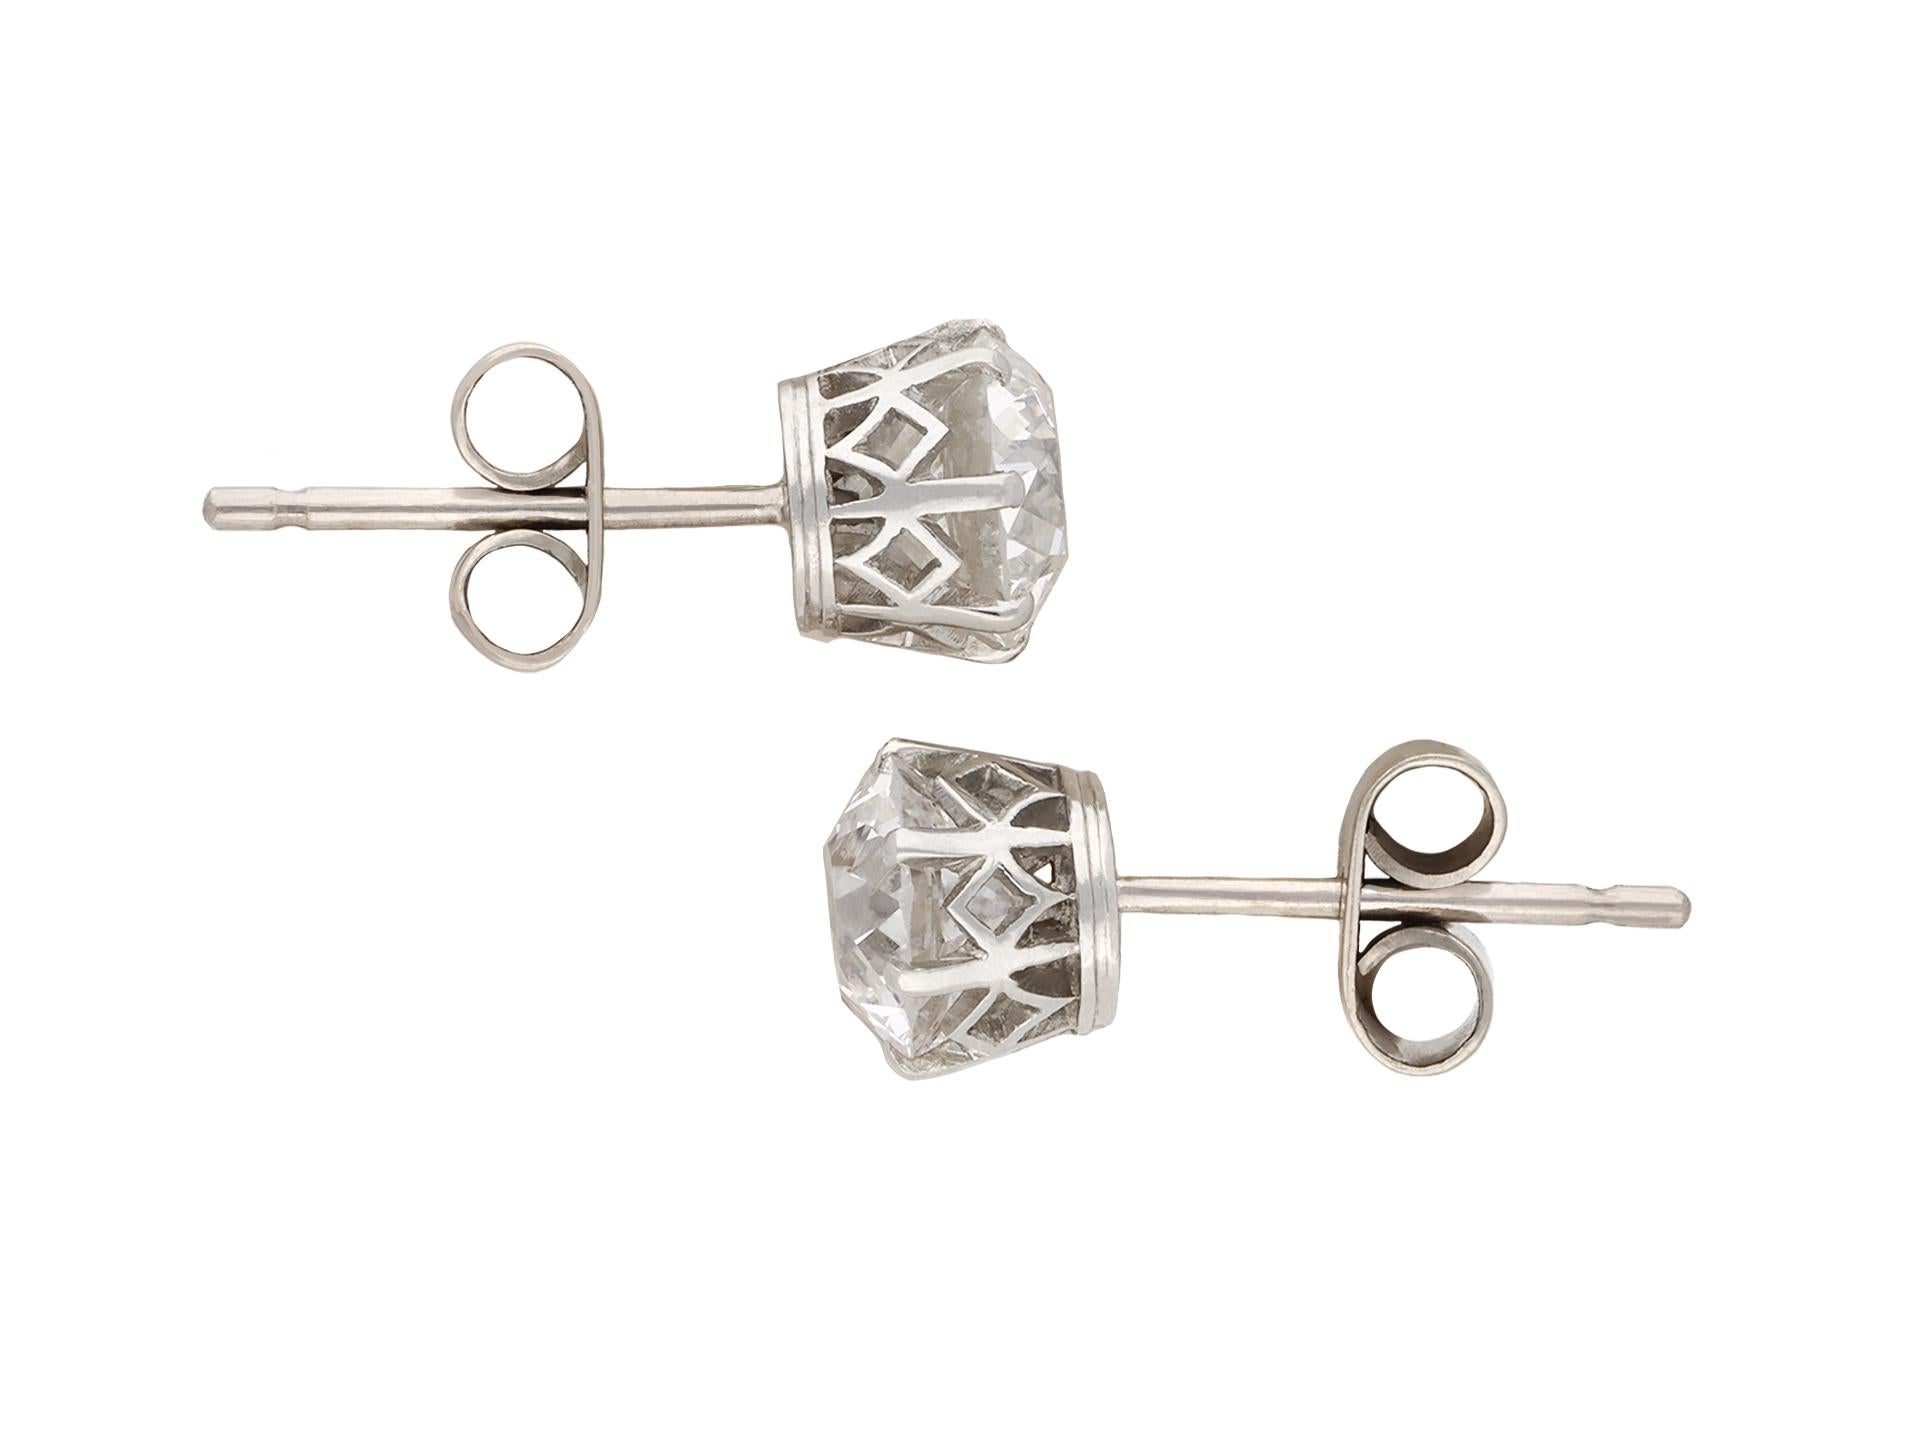 Old cut diamond stud earrings. A matching pair, each set with one round old cut diamond, one F colour, SI1 clarity, with a weight of 1.13 carats, the other G colour, SI1 clarity, with a weight of 1.18 carats, two in total in open back claw settings